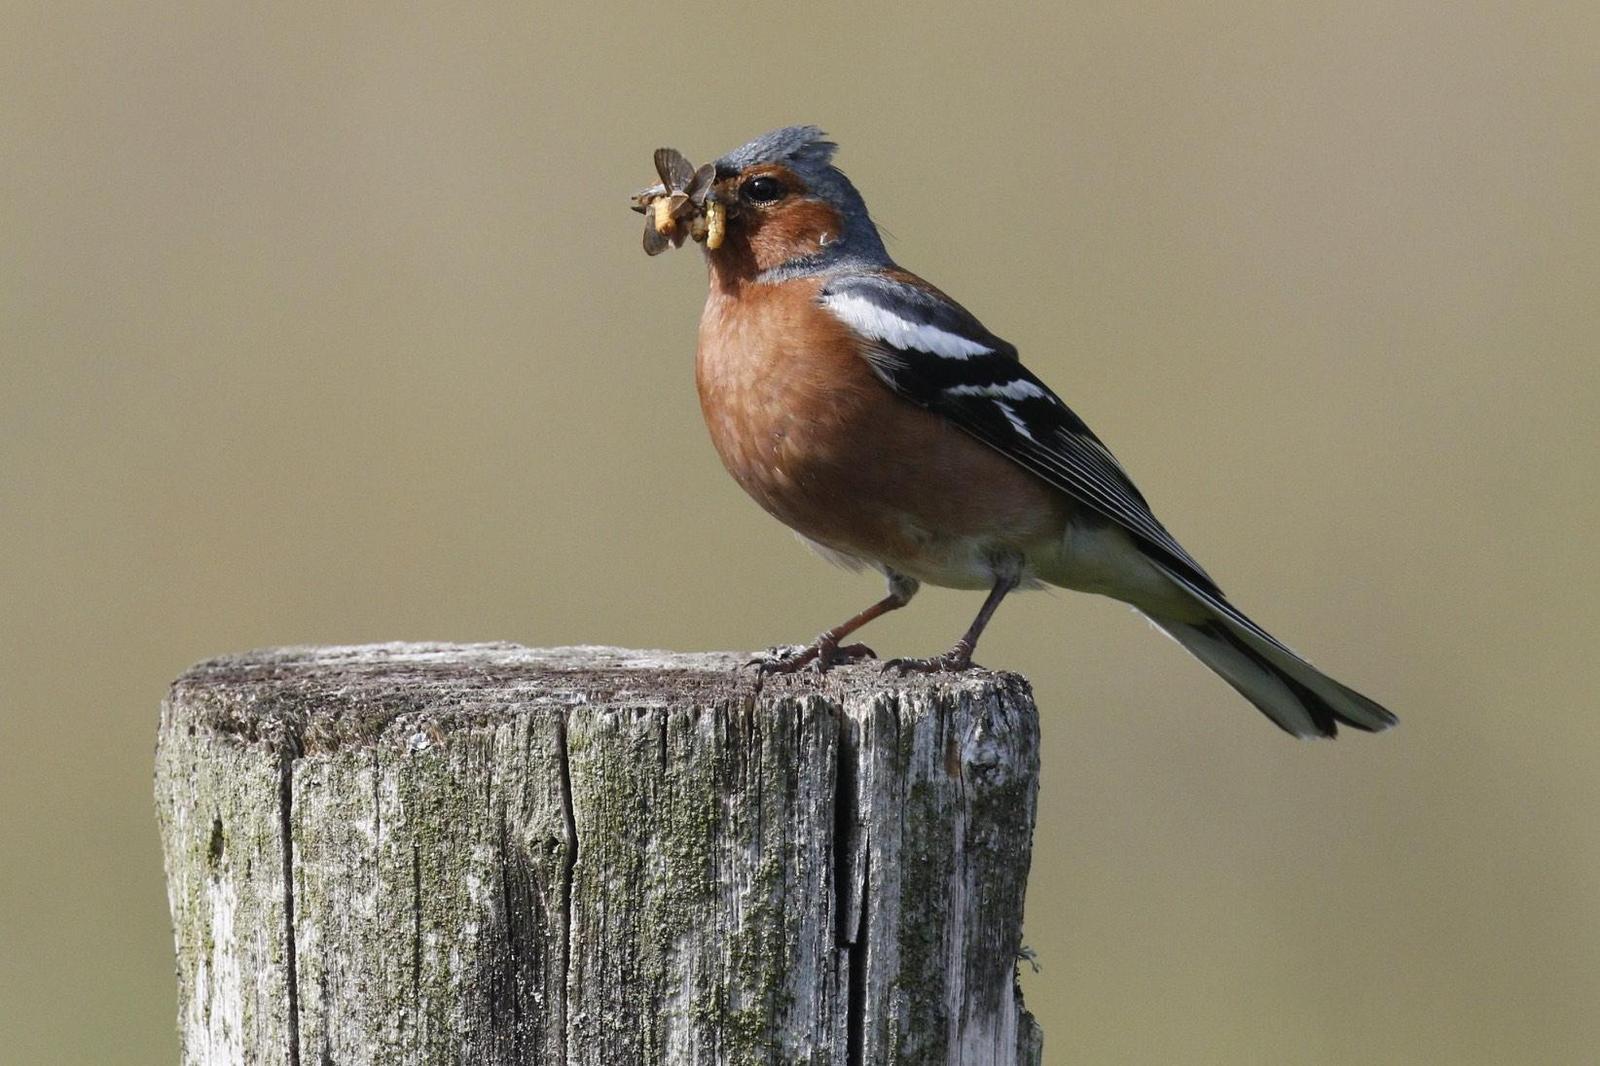 Common Chaffinch Photo by Emily Willoughby